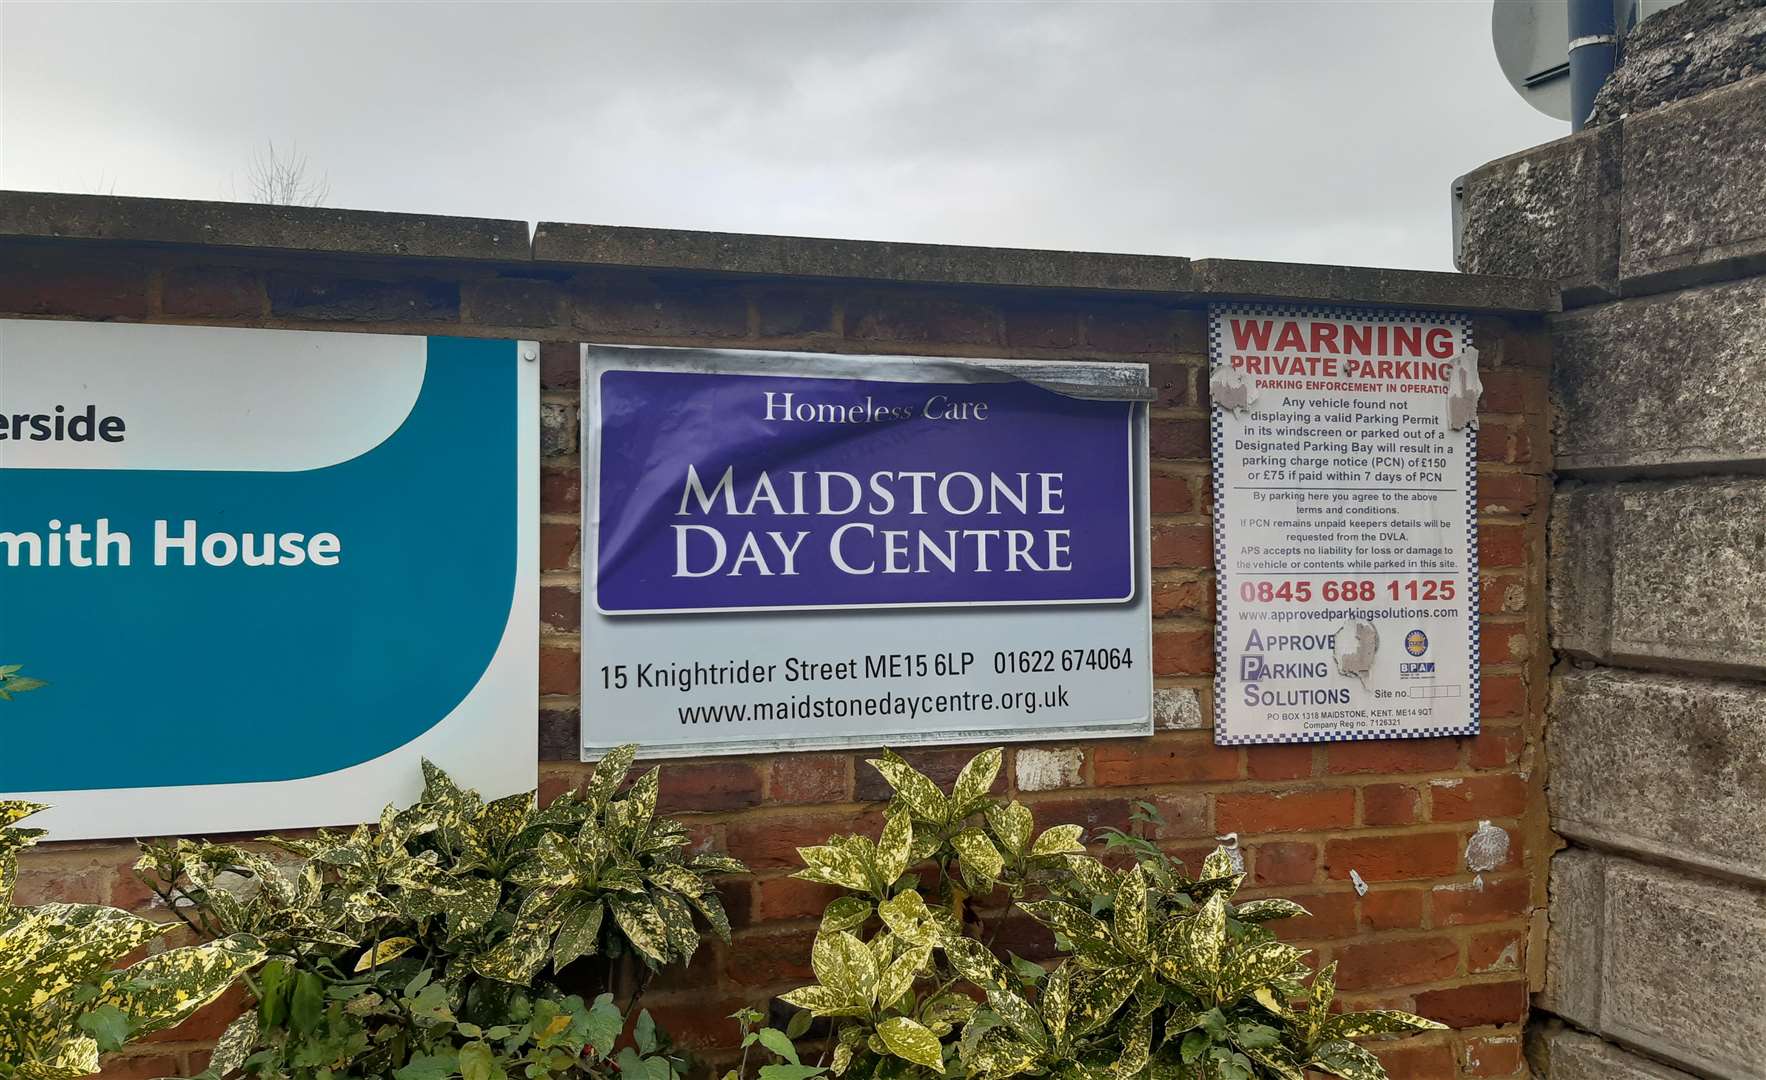 The day centre in Maidstone has become a welcoming support hub for rough sleepers